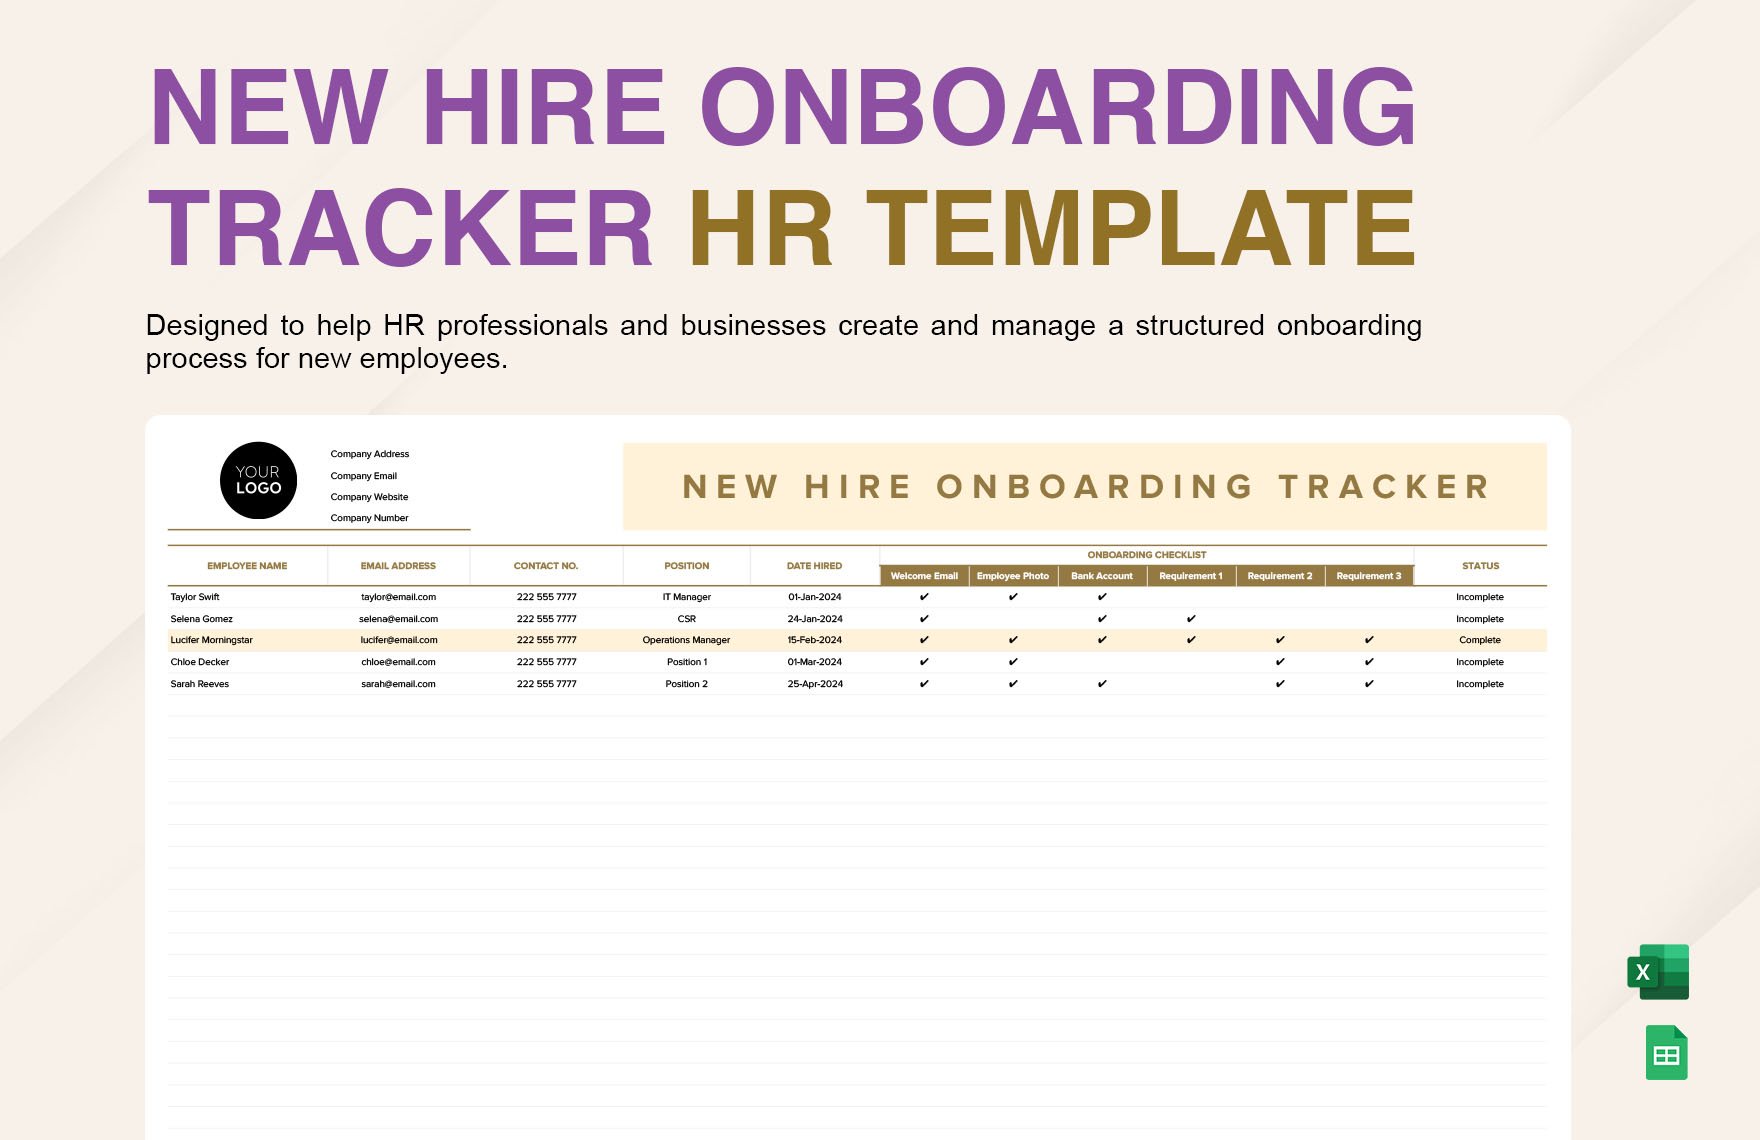 New Hire Onboarding Tracker HR Template